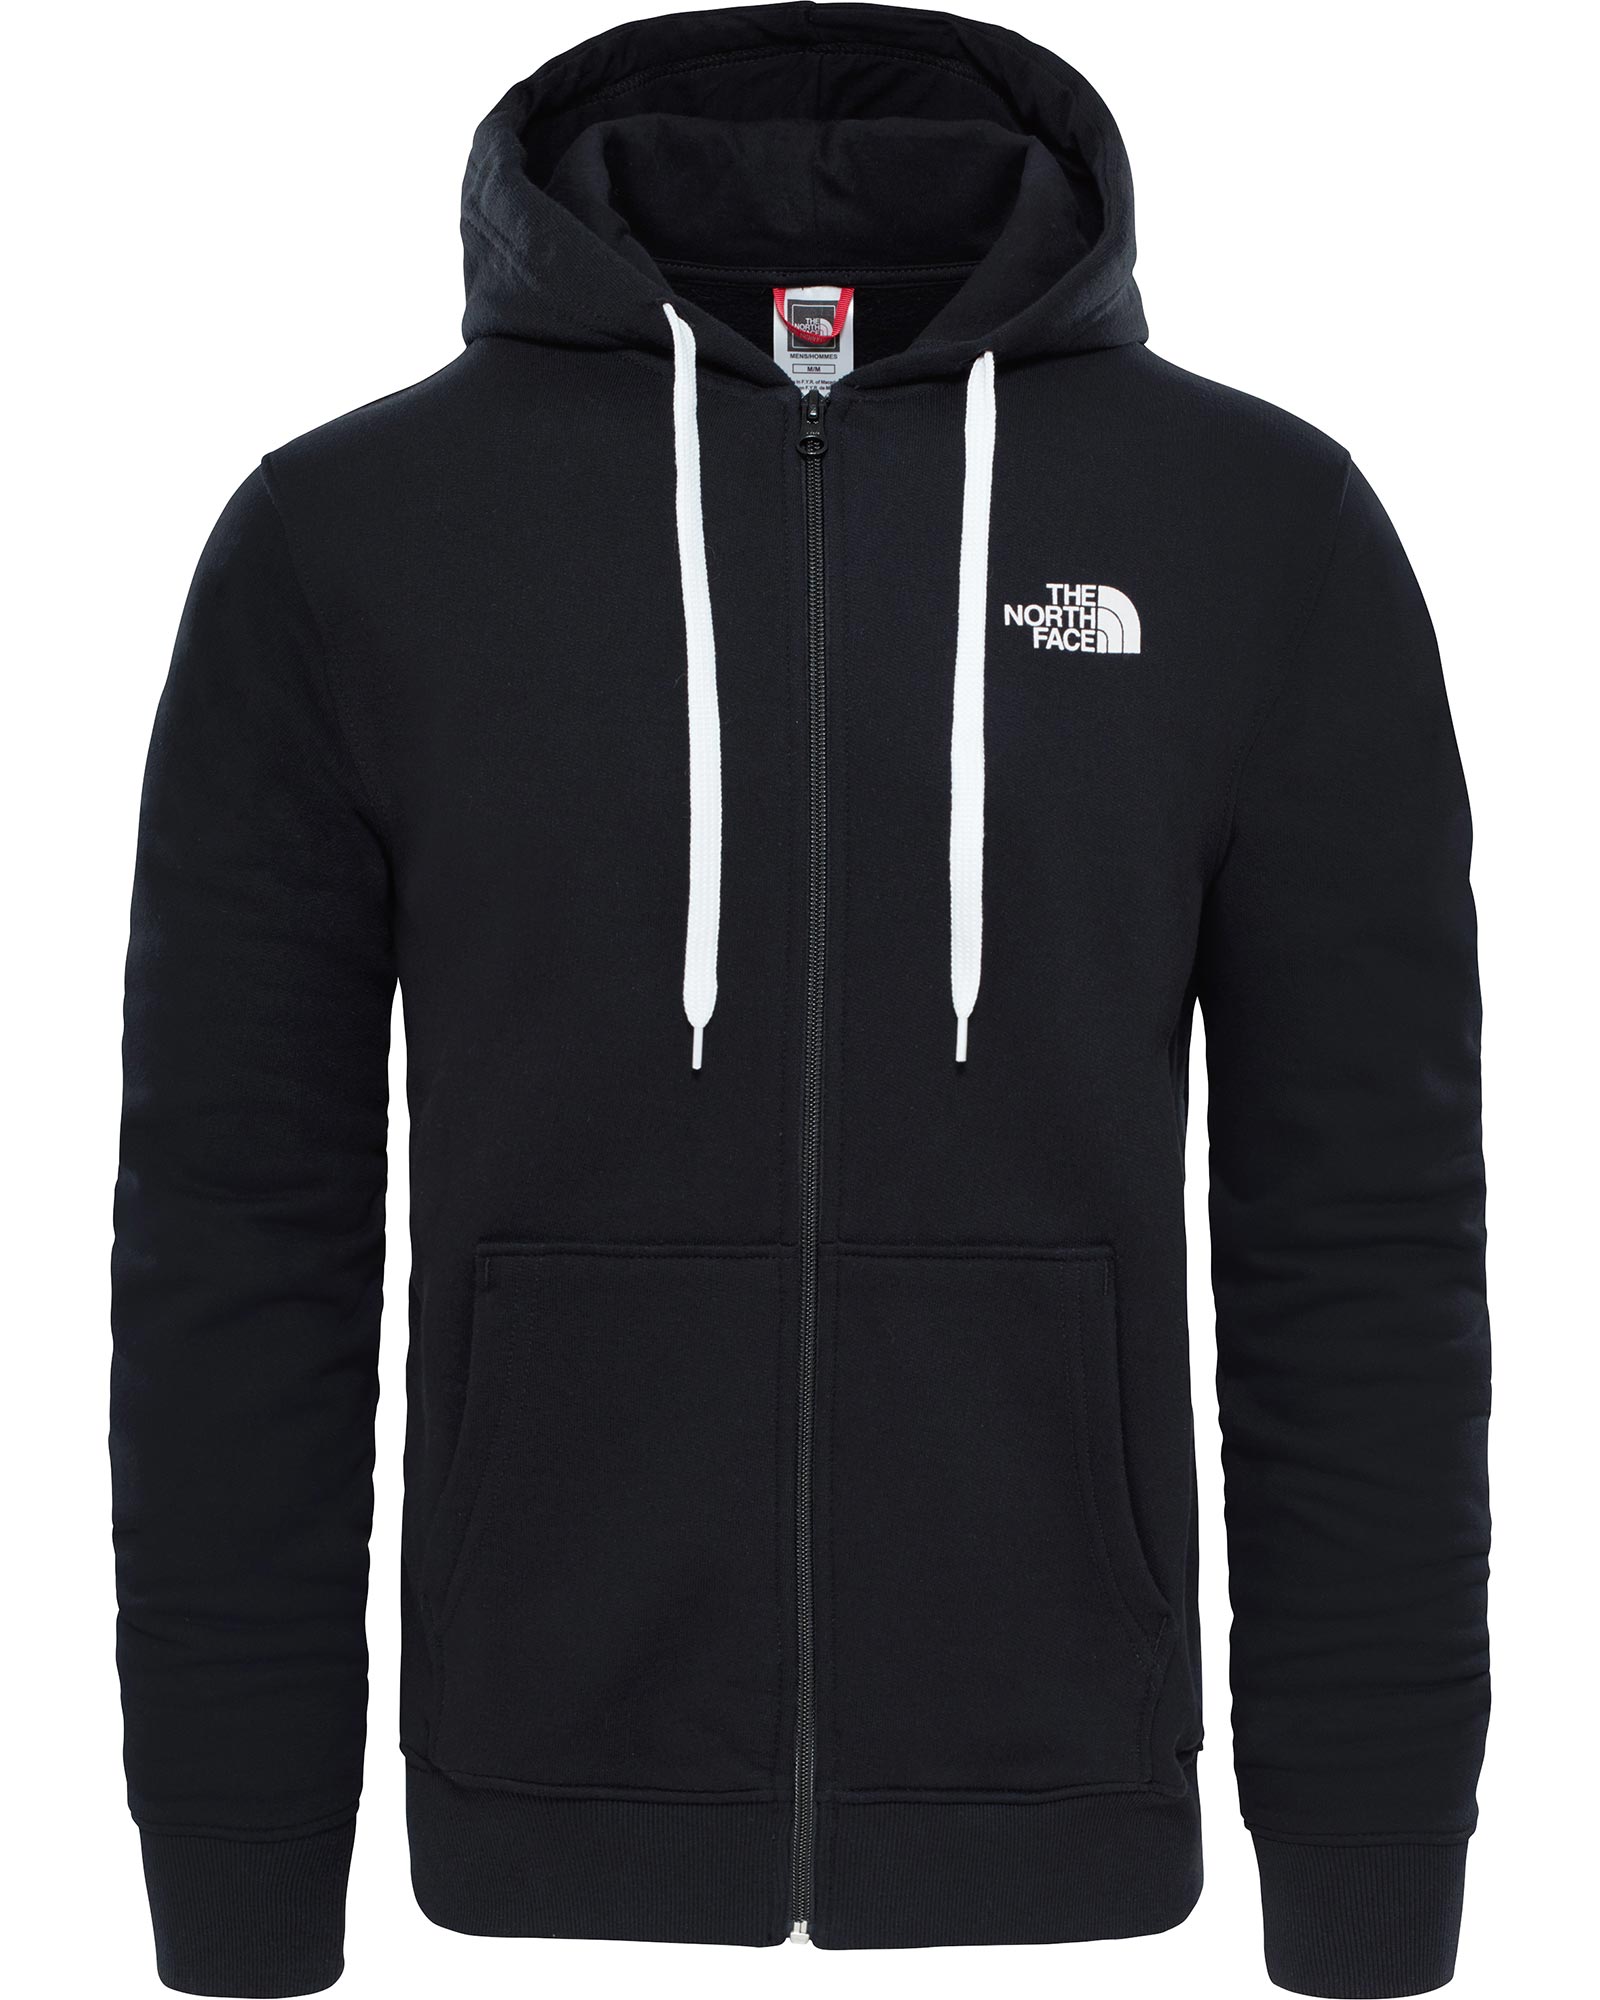 The North Face Open Gate Mens Full Zip Hoodie